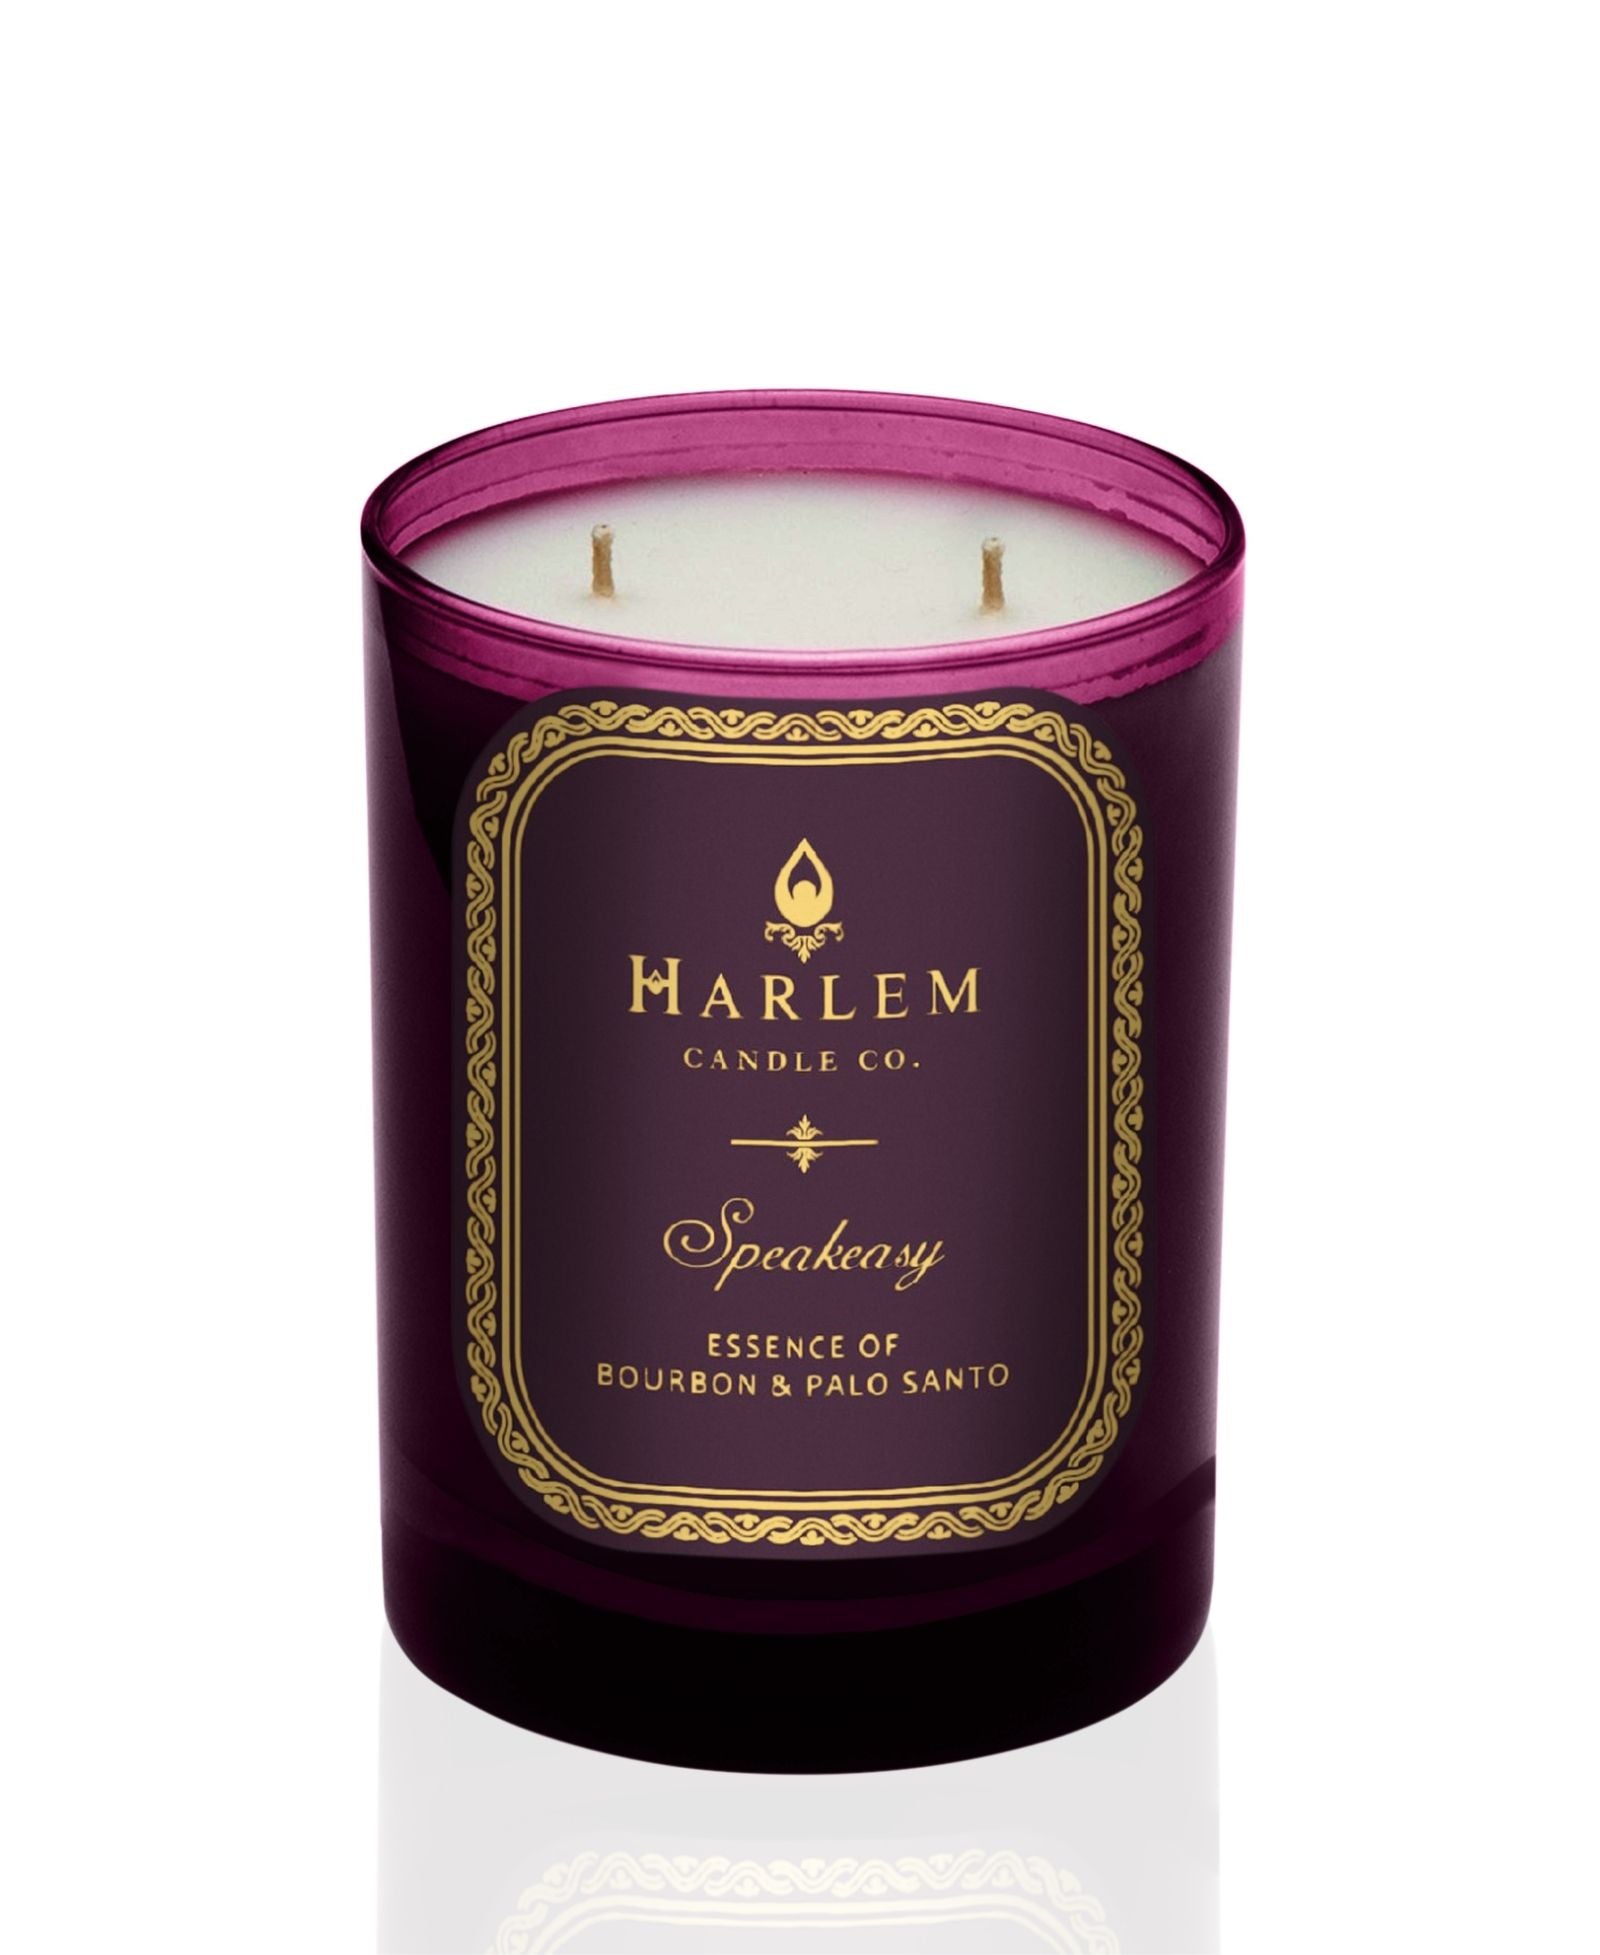 Burgundy 11 oz Speakeasy candle with gold and burgundy label/. This candle has 2 wicks.